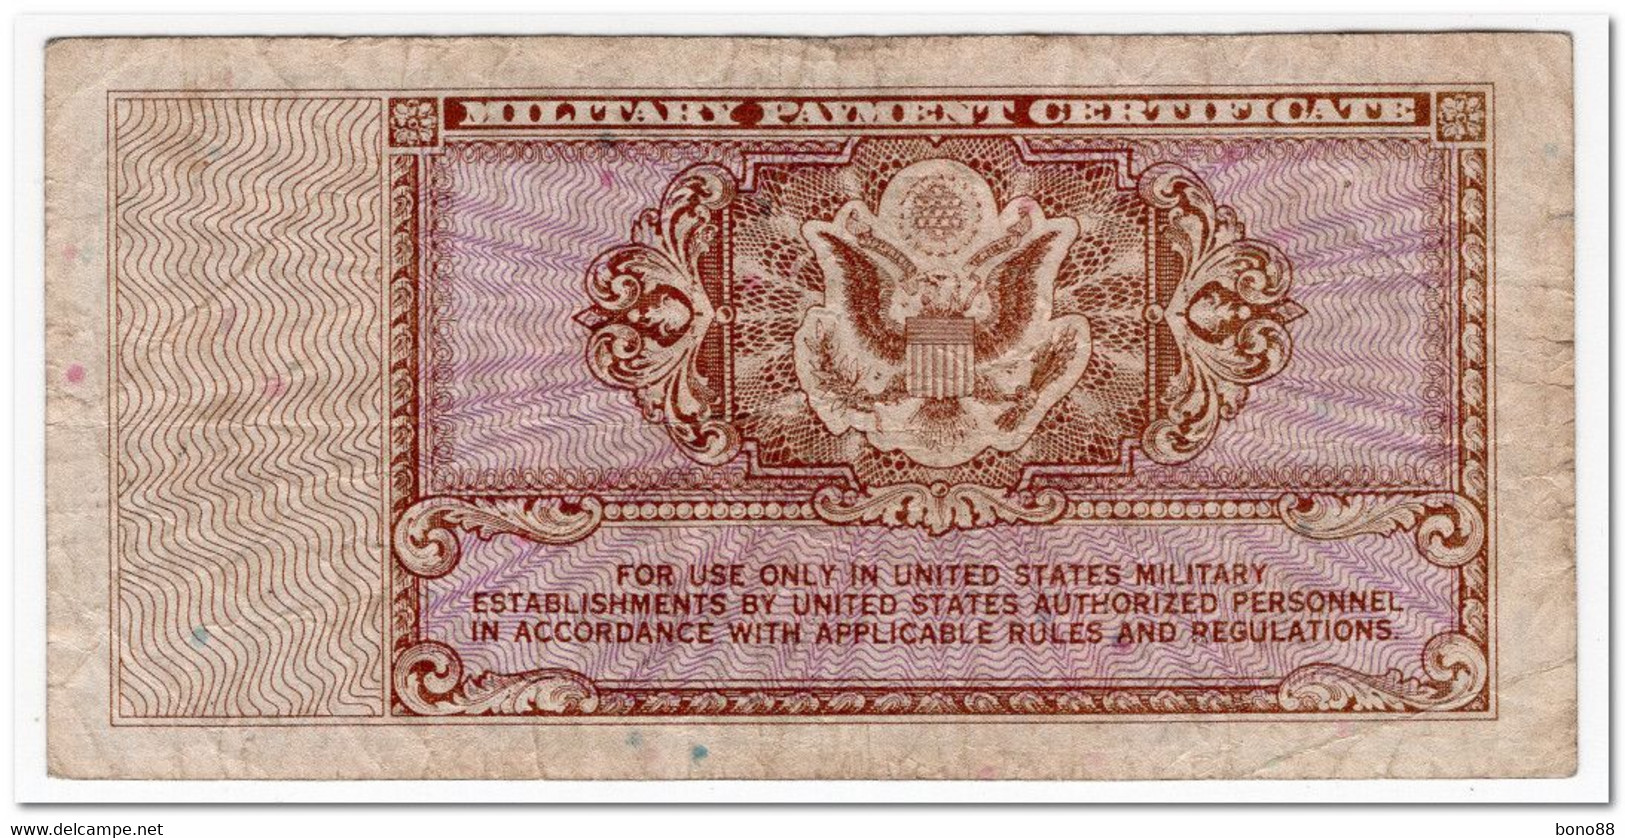 UNITED STATES,MILITARY PAYMENT CERTIFICATE,25 CENTS,1948,P.M17,aF - 1948-1951 - Series 472